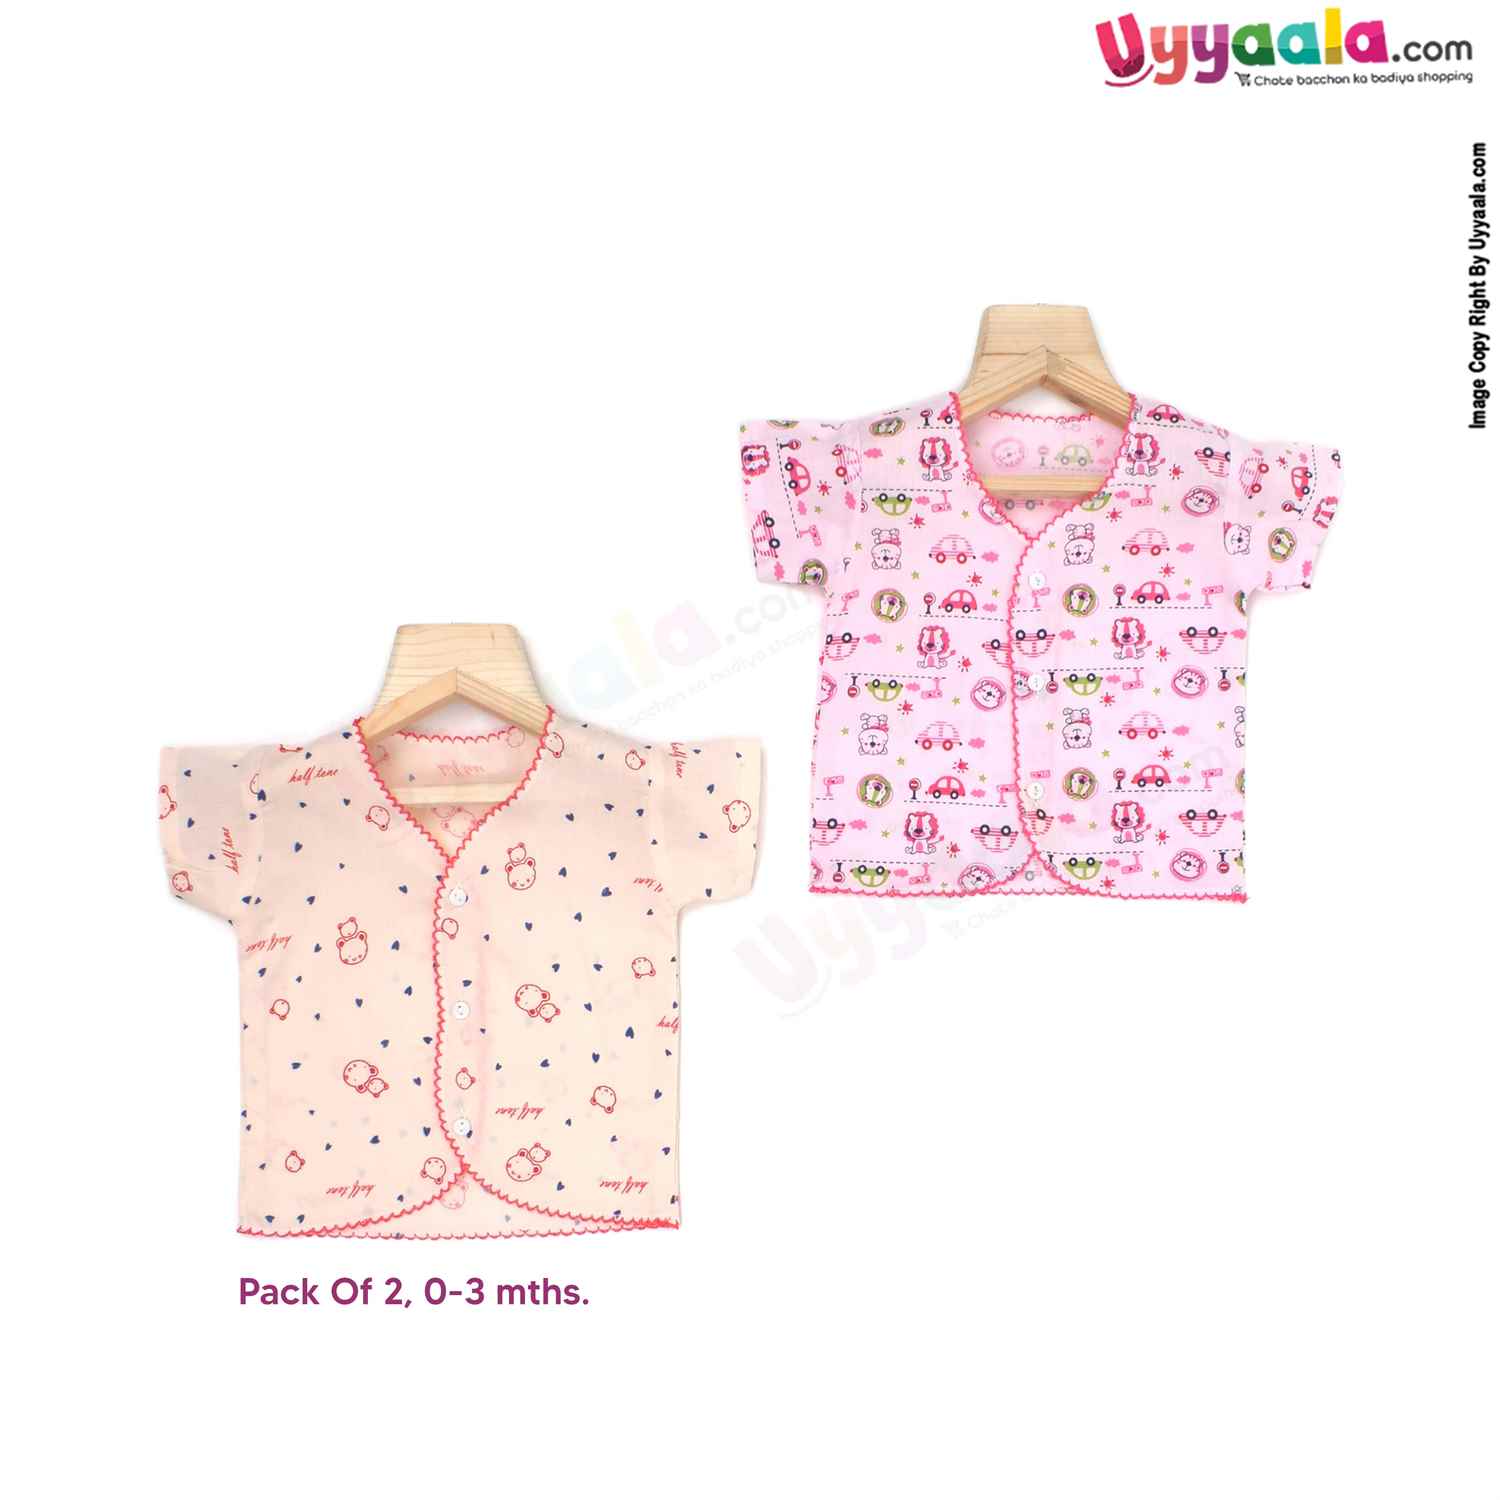 Half Sleeve Baby Jabla Set, Front Opening Button Model, Premium Quality Cotton Baby Wear, Car & Bear Print, (0-3M), 2Pack - Pink & Peach